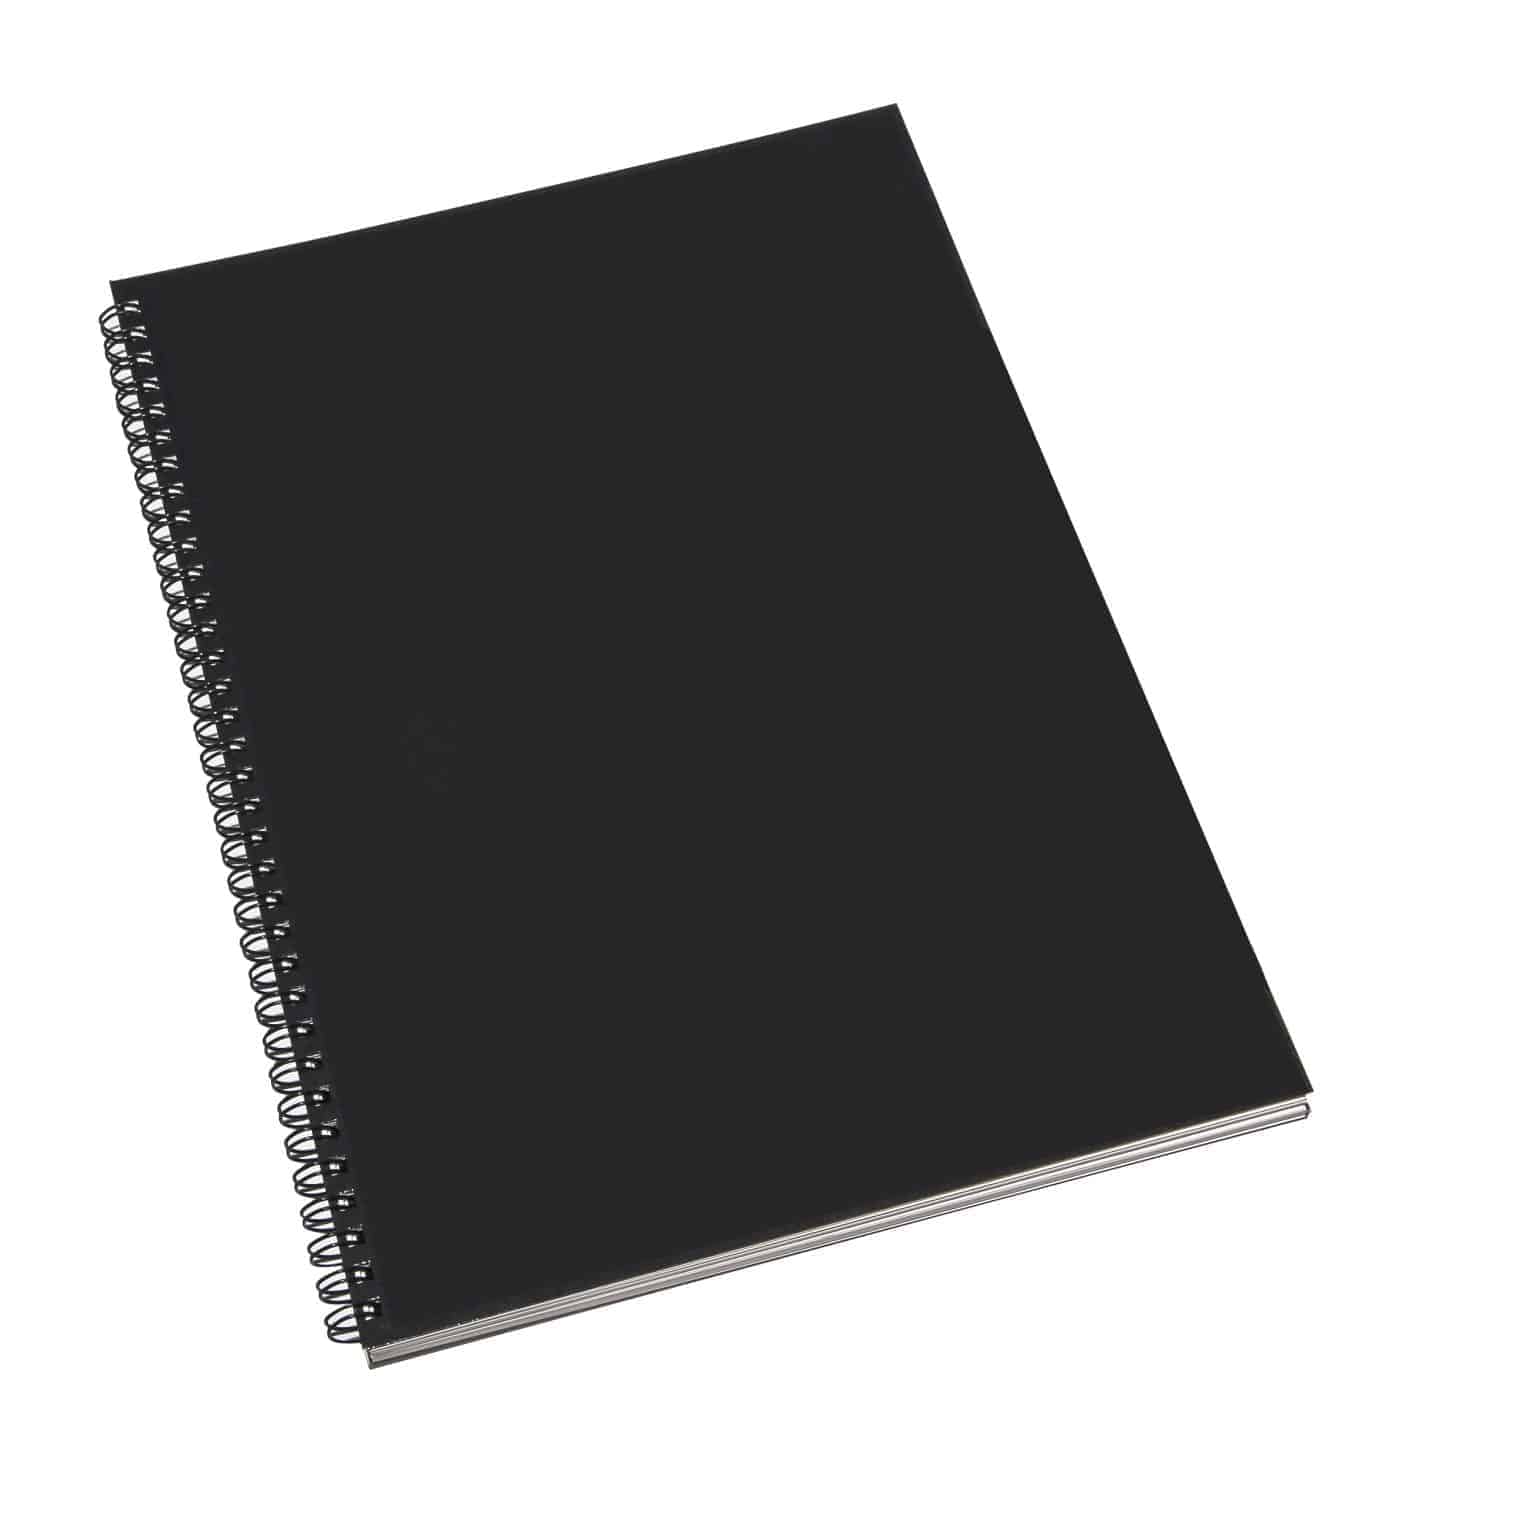 A4 Spiral Bound Sketchbooks - Forward Products